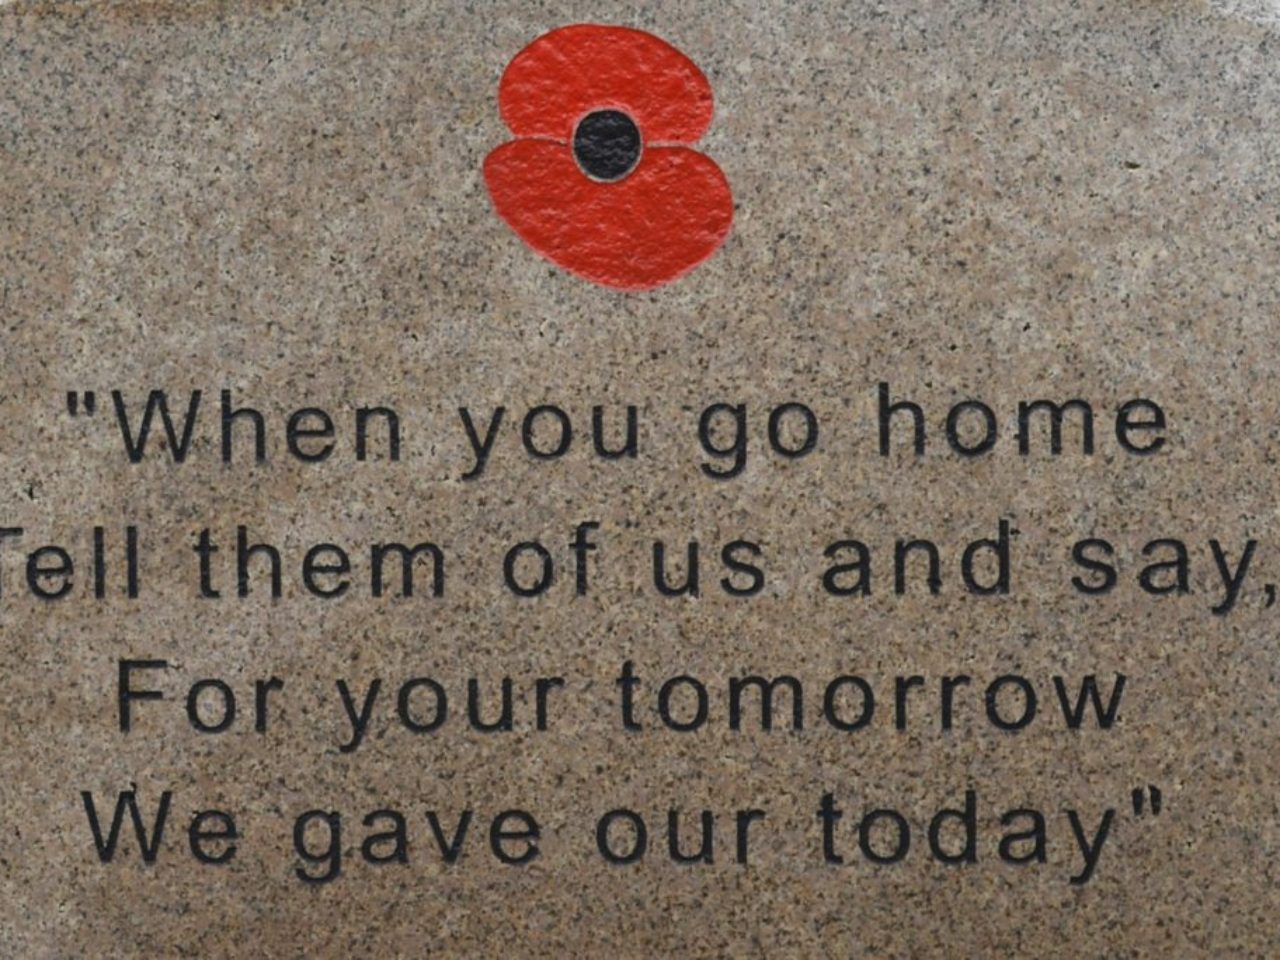 war-memory-poppy-monument-quote-544558/